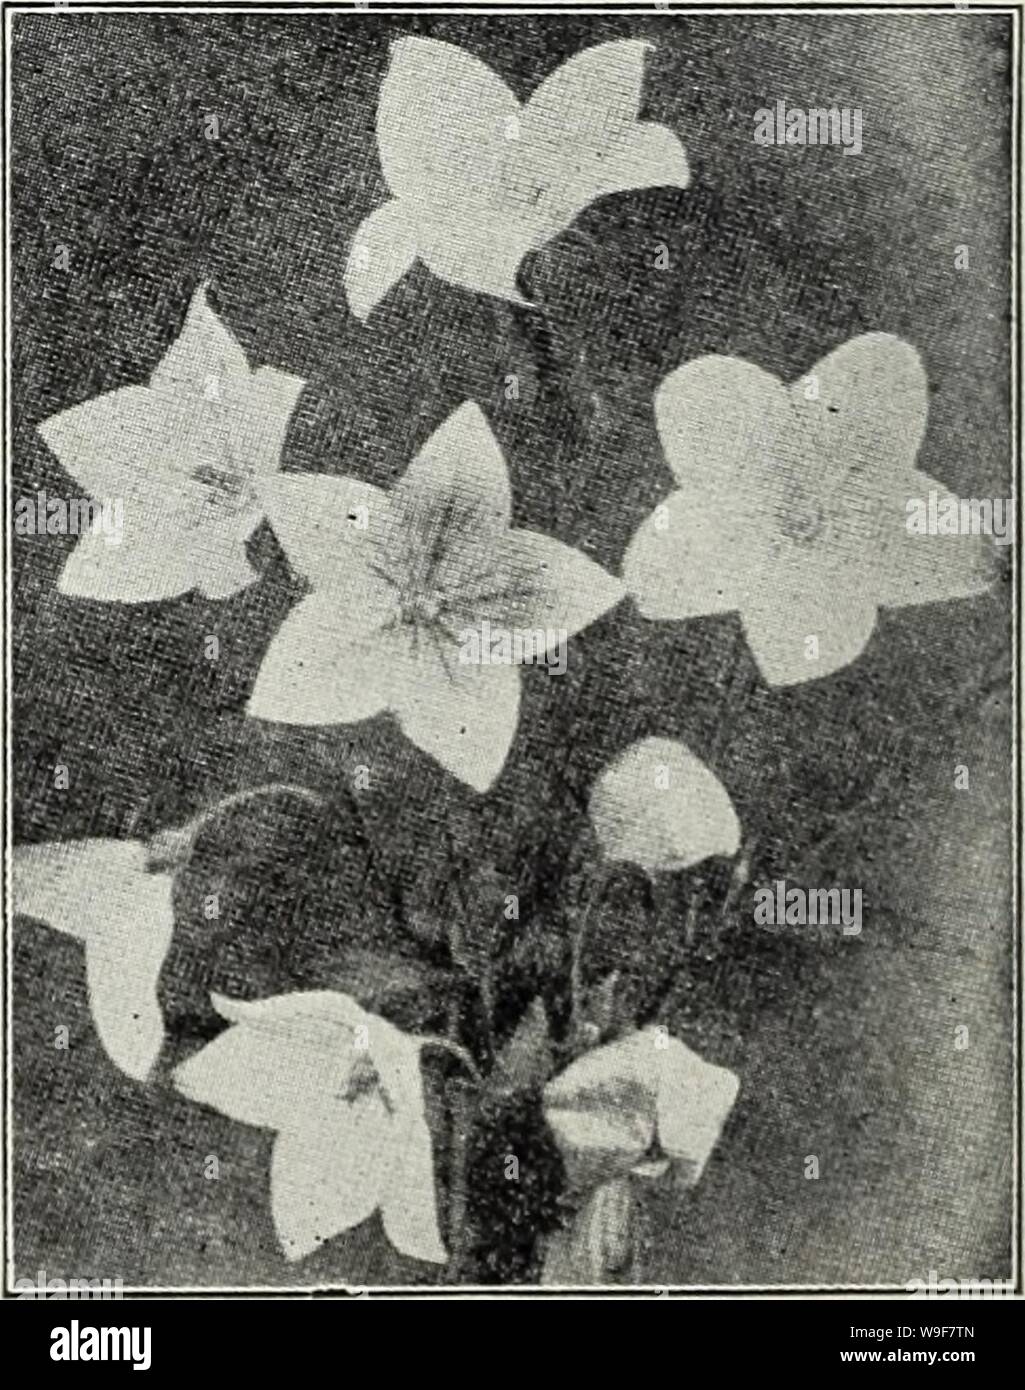 Archive image from page 21 of Currie's bulbs and plants . Currie's bulbs and plants : autumn 1928  curriesbulbsplan19curr Year: 1928 ( Myosotis RANUNCULUS (Buttercup) Acris 11. pi. — Double golden- yellow flowers. Repens fl. pi.—A creeping varie- ty with golden-yellow flowers. Price, each, 25c; per doz., $2.50. RUDBECKIA (Cone Flowers) Golden Glow — Grows 6 feet high, bearing masses of double golden-yellow flowers. Fulgida — Orange yellow with black center. Purpurea—Large, reddish-purple flowers with brown cone. Price, each, 25c; per &lt;lozen, $2.50. SALVIA (Meadow Sage) Azurea Grandiflora—rB Stock Photo